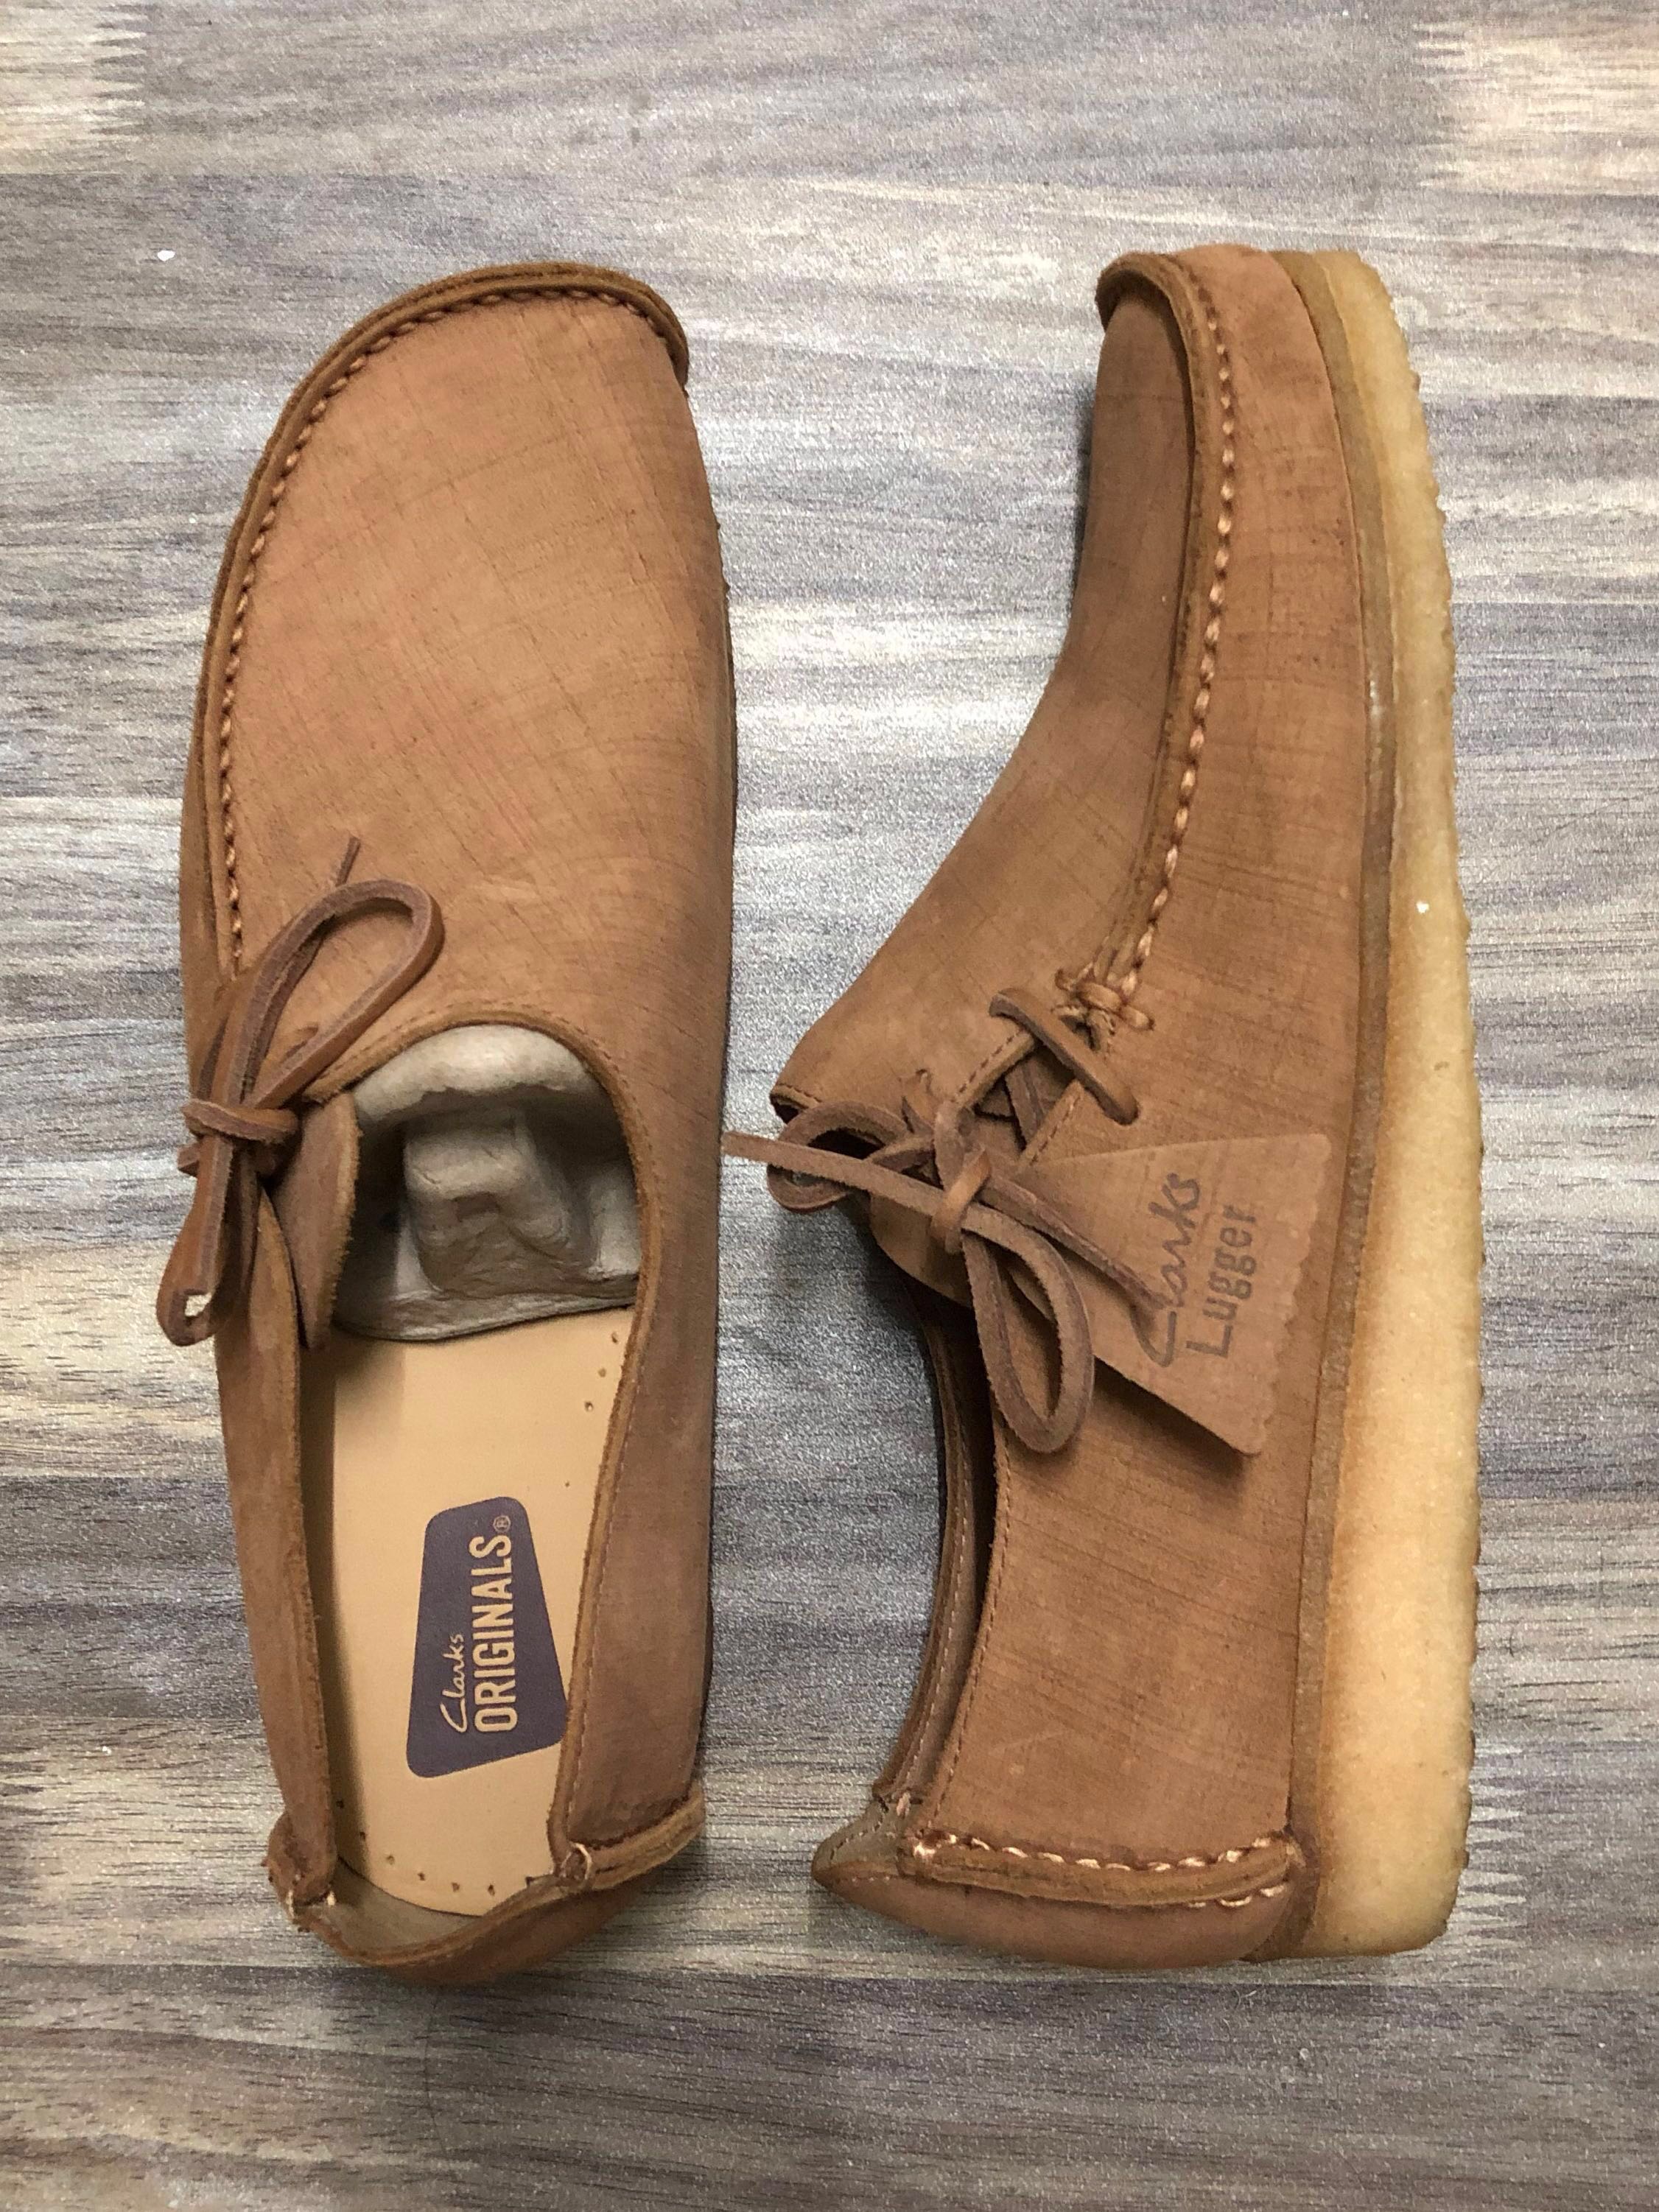 straf ros Udvej CLARKS ORIGINAL LUGGER, Men's Fashion, Footwear, Casual shoes on Carousell